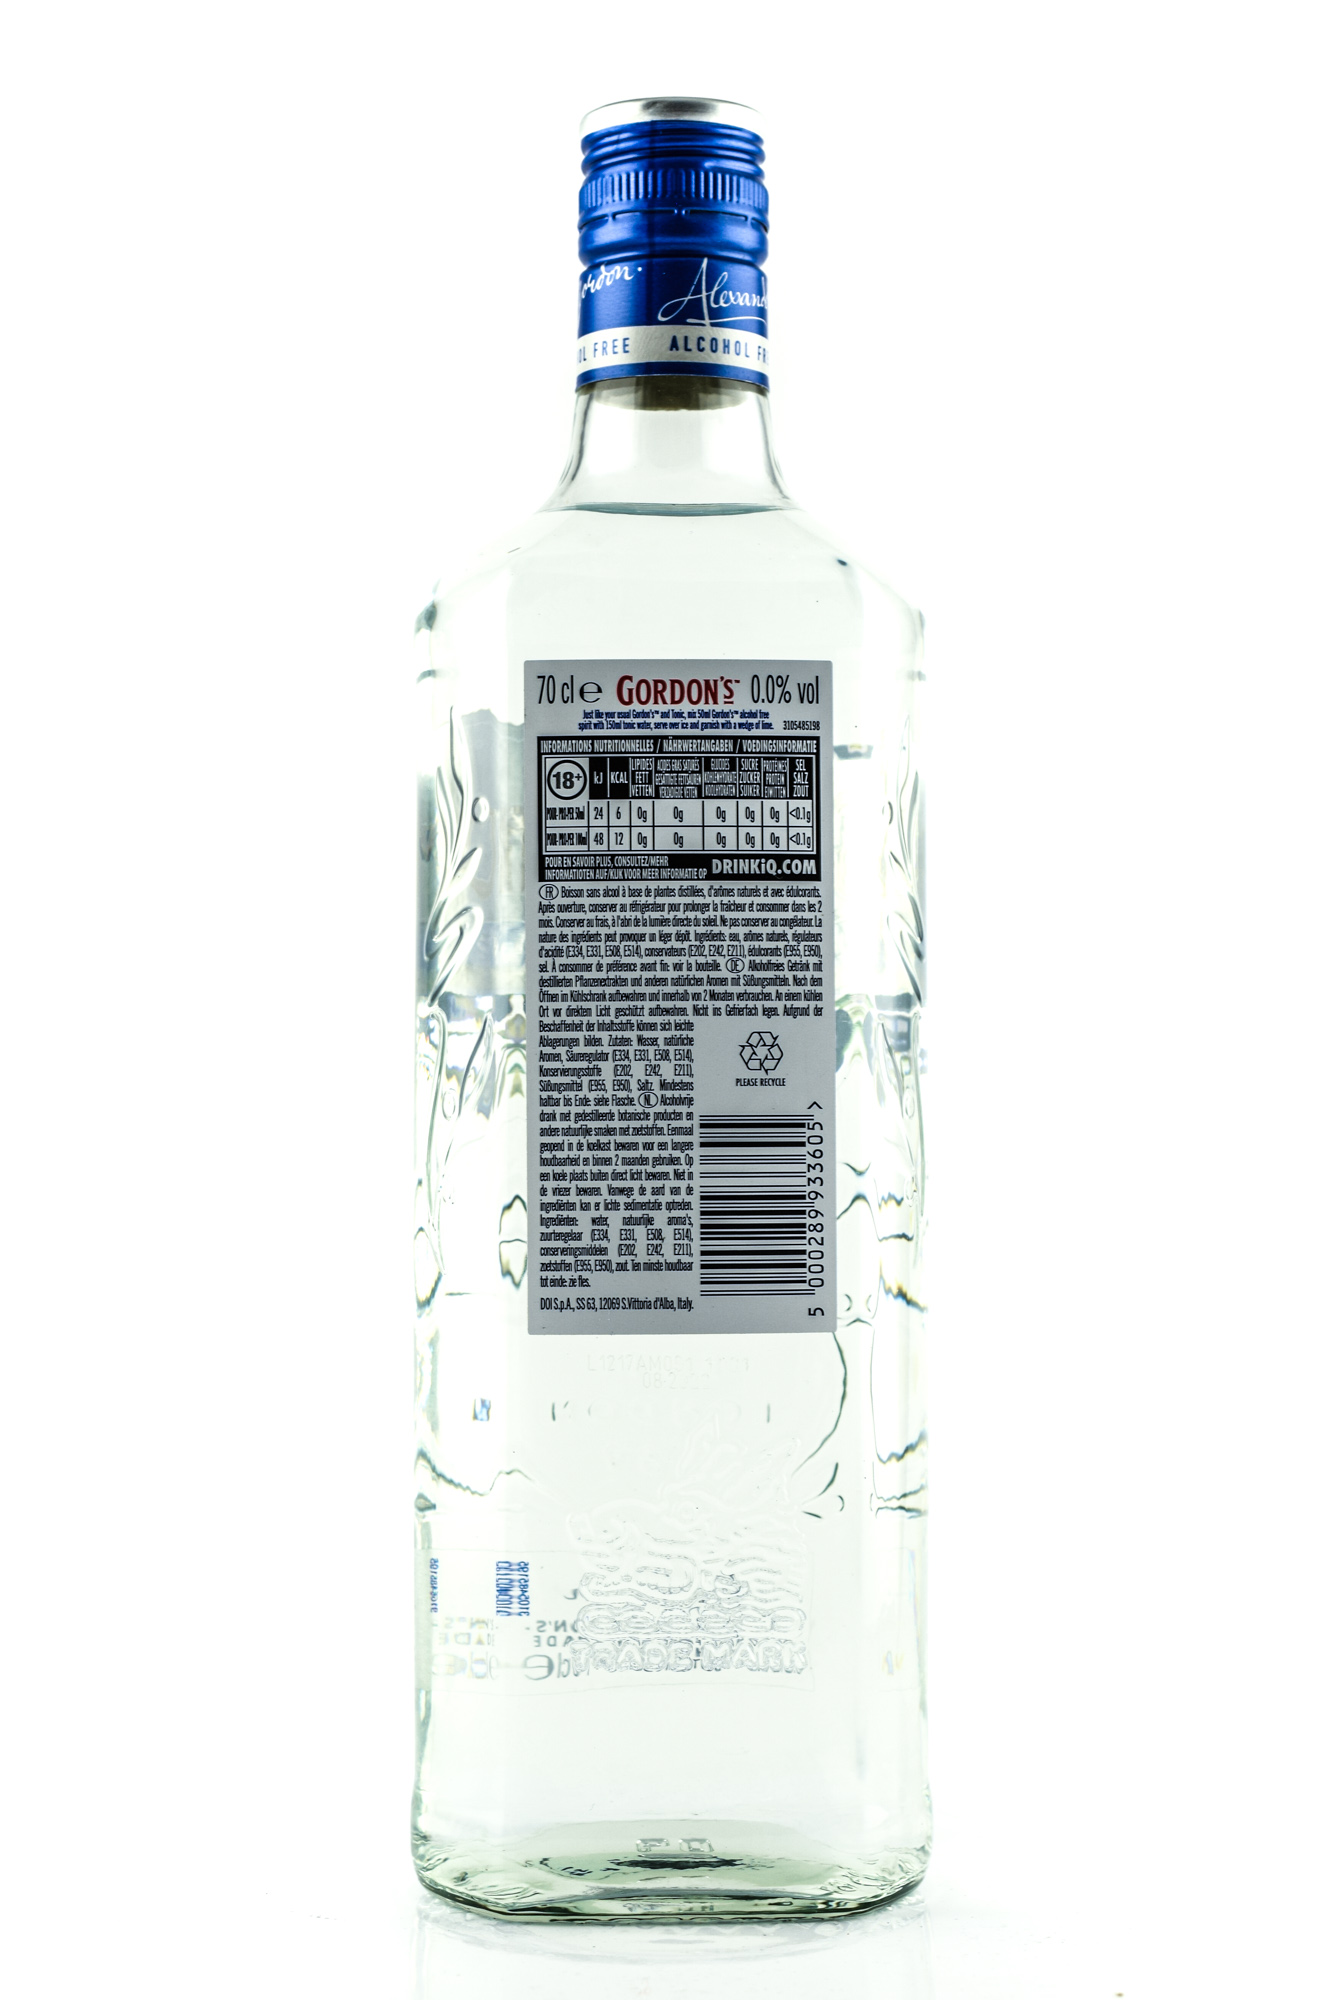 of Home Alcohol | Malts >> Home of Gordon\'s Free at Malts explore now! 0,0%vol.